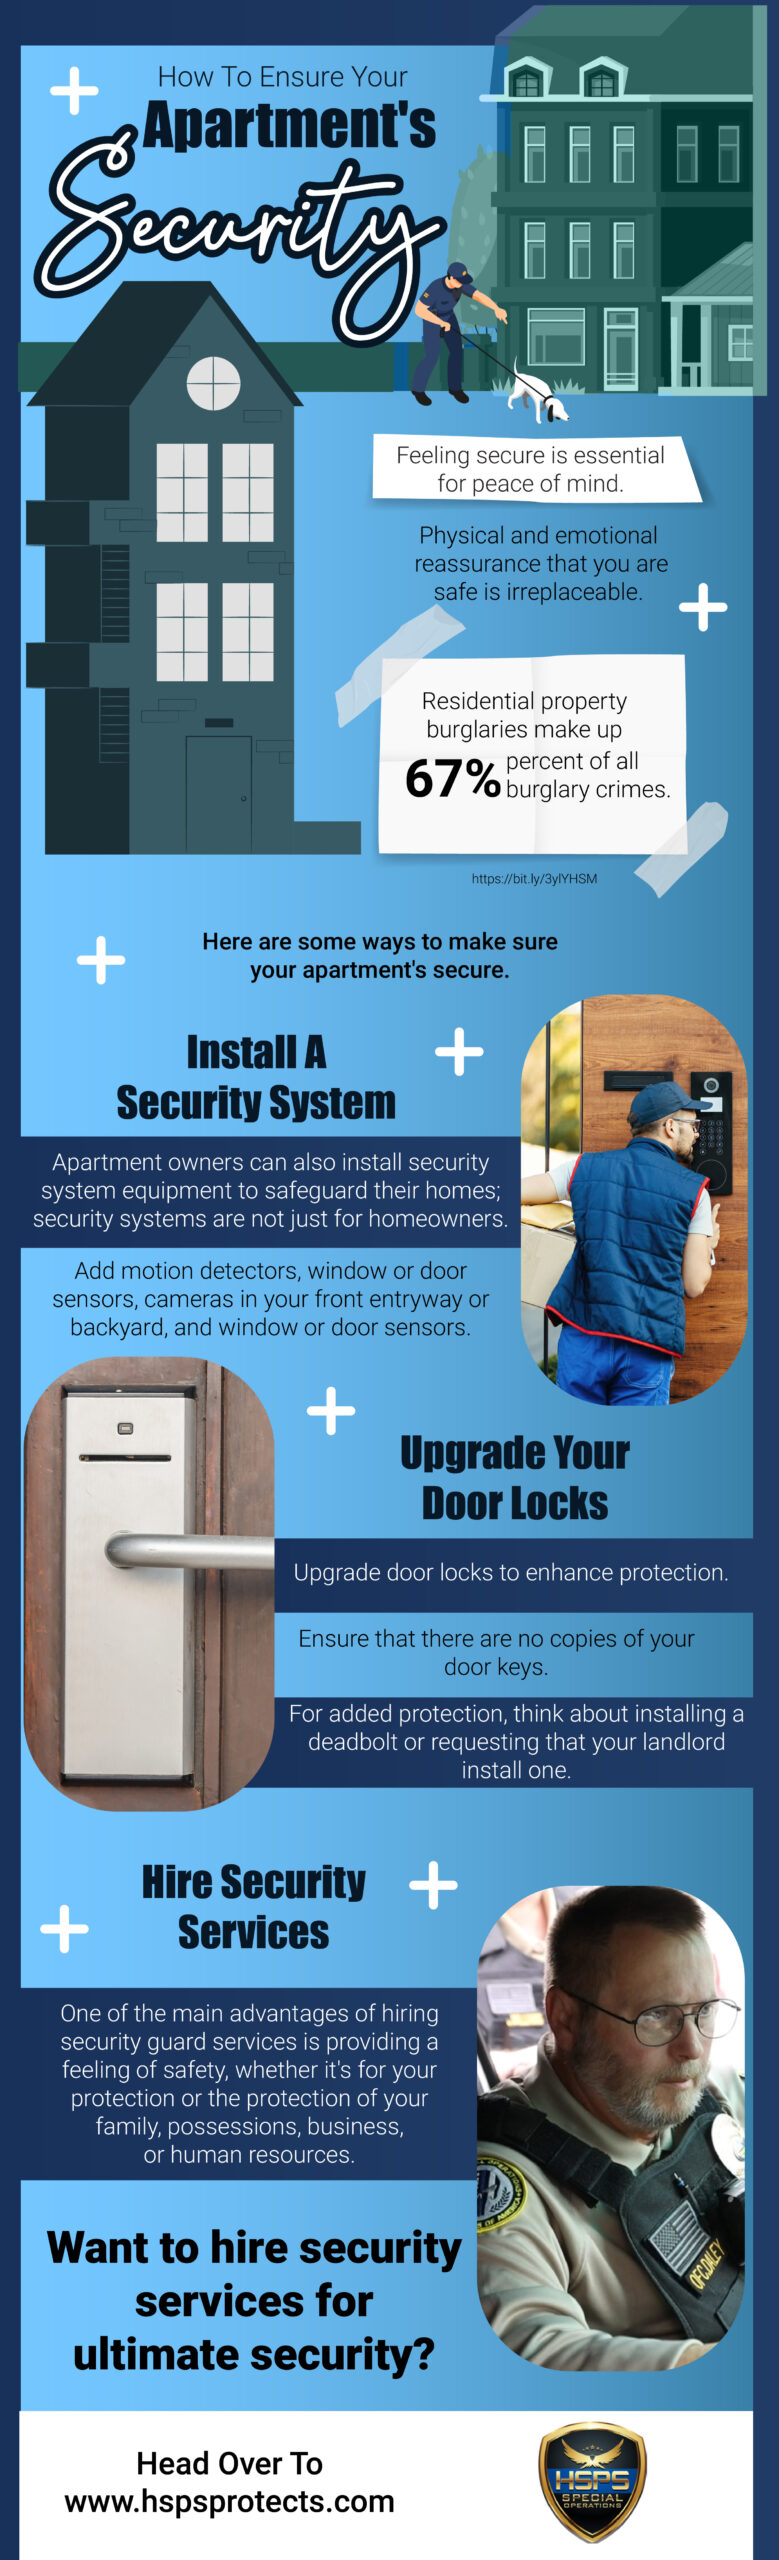 How To Ensure Your Apartment's Security